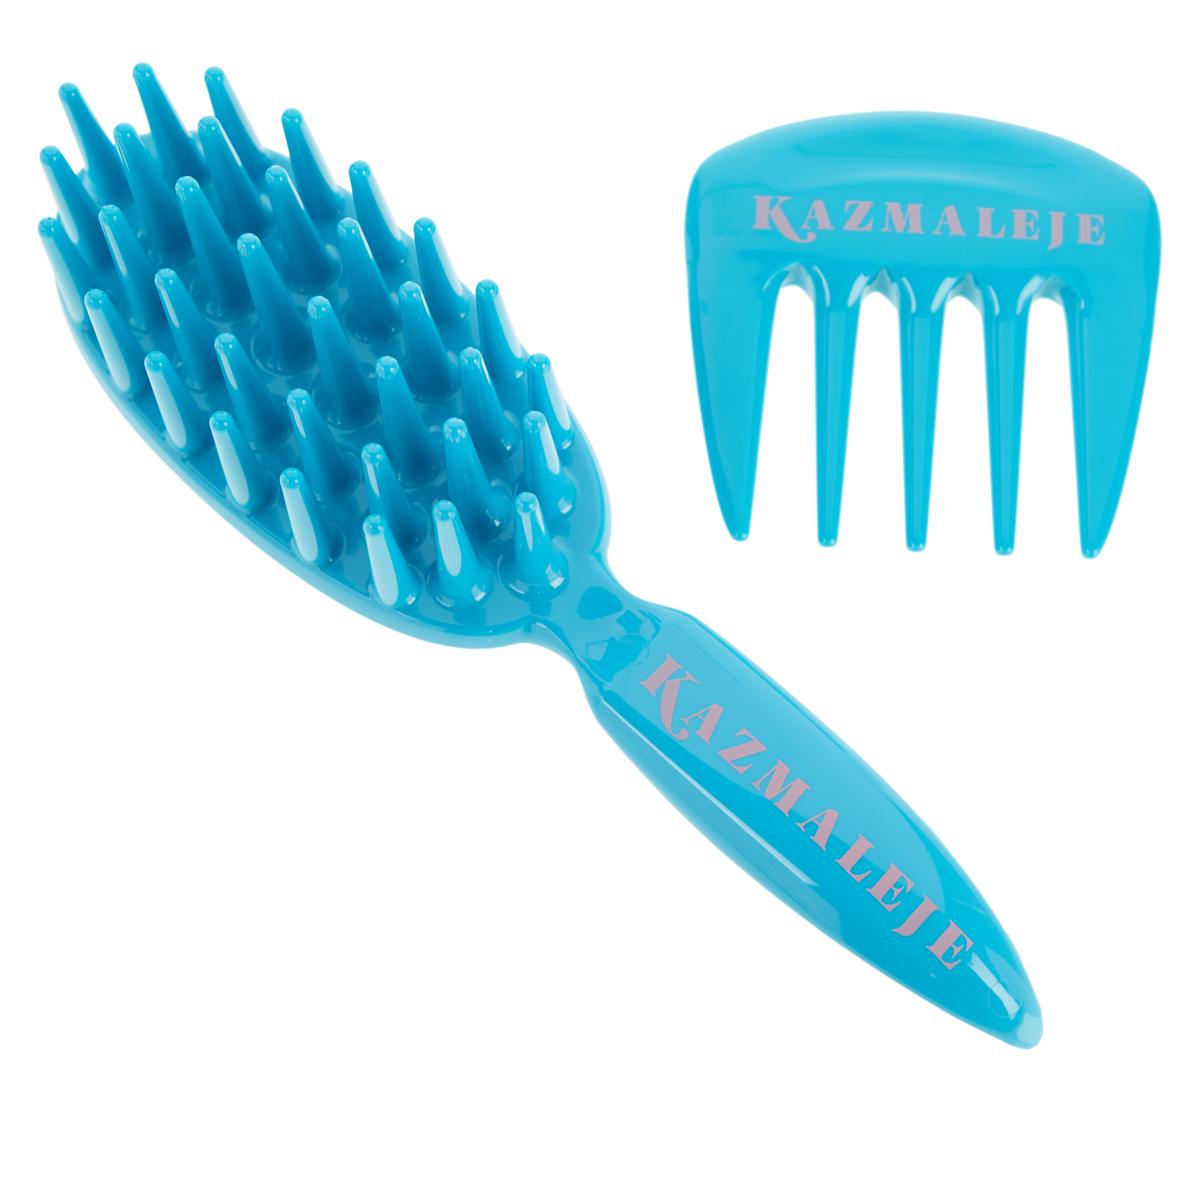 A blue kazmaleje kurlsplus set of combs, a top-rated hair tool from HSN